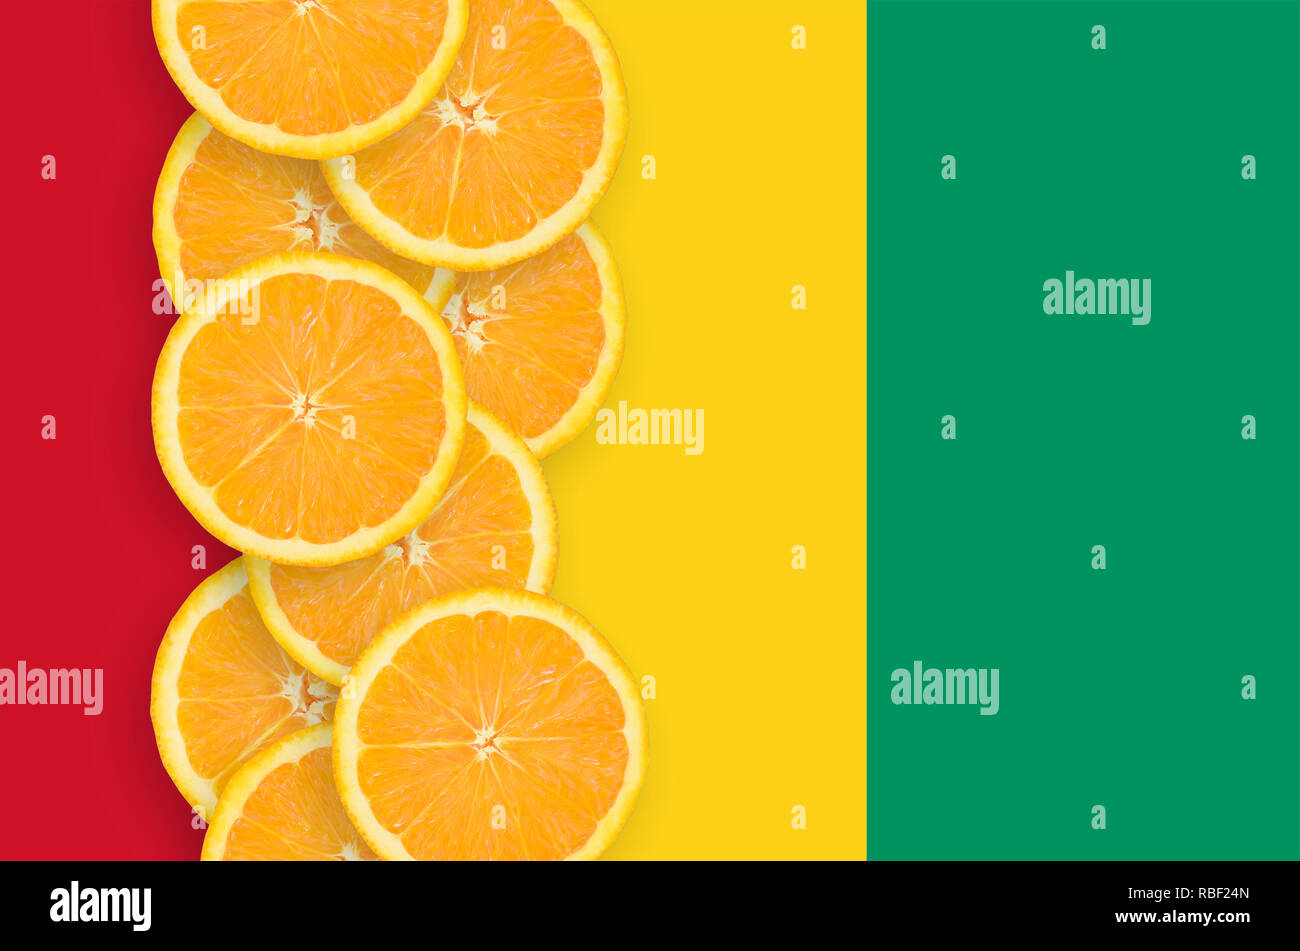 Guinea flag and vertical row of orange citrus fruit slices. Concept of growing as well as import and export of citrus fruits Stock Photo